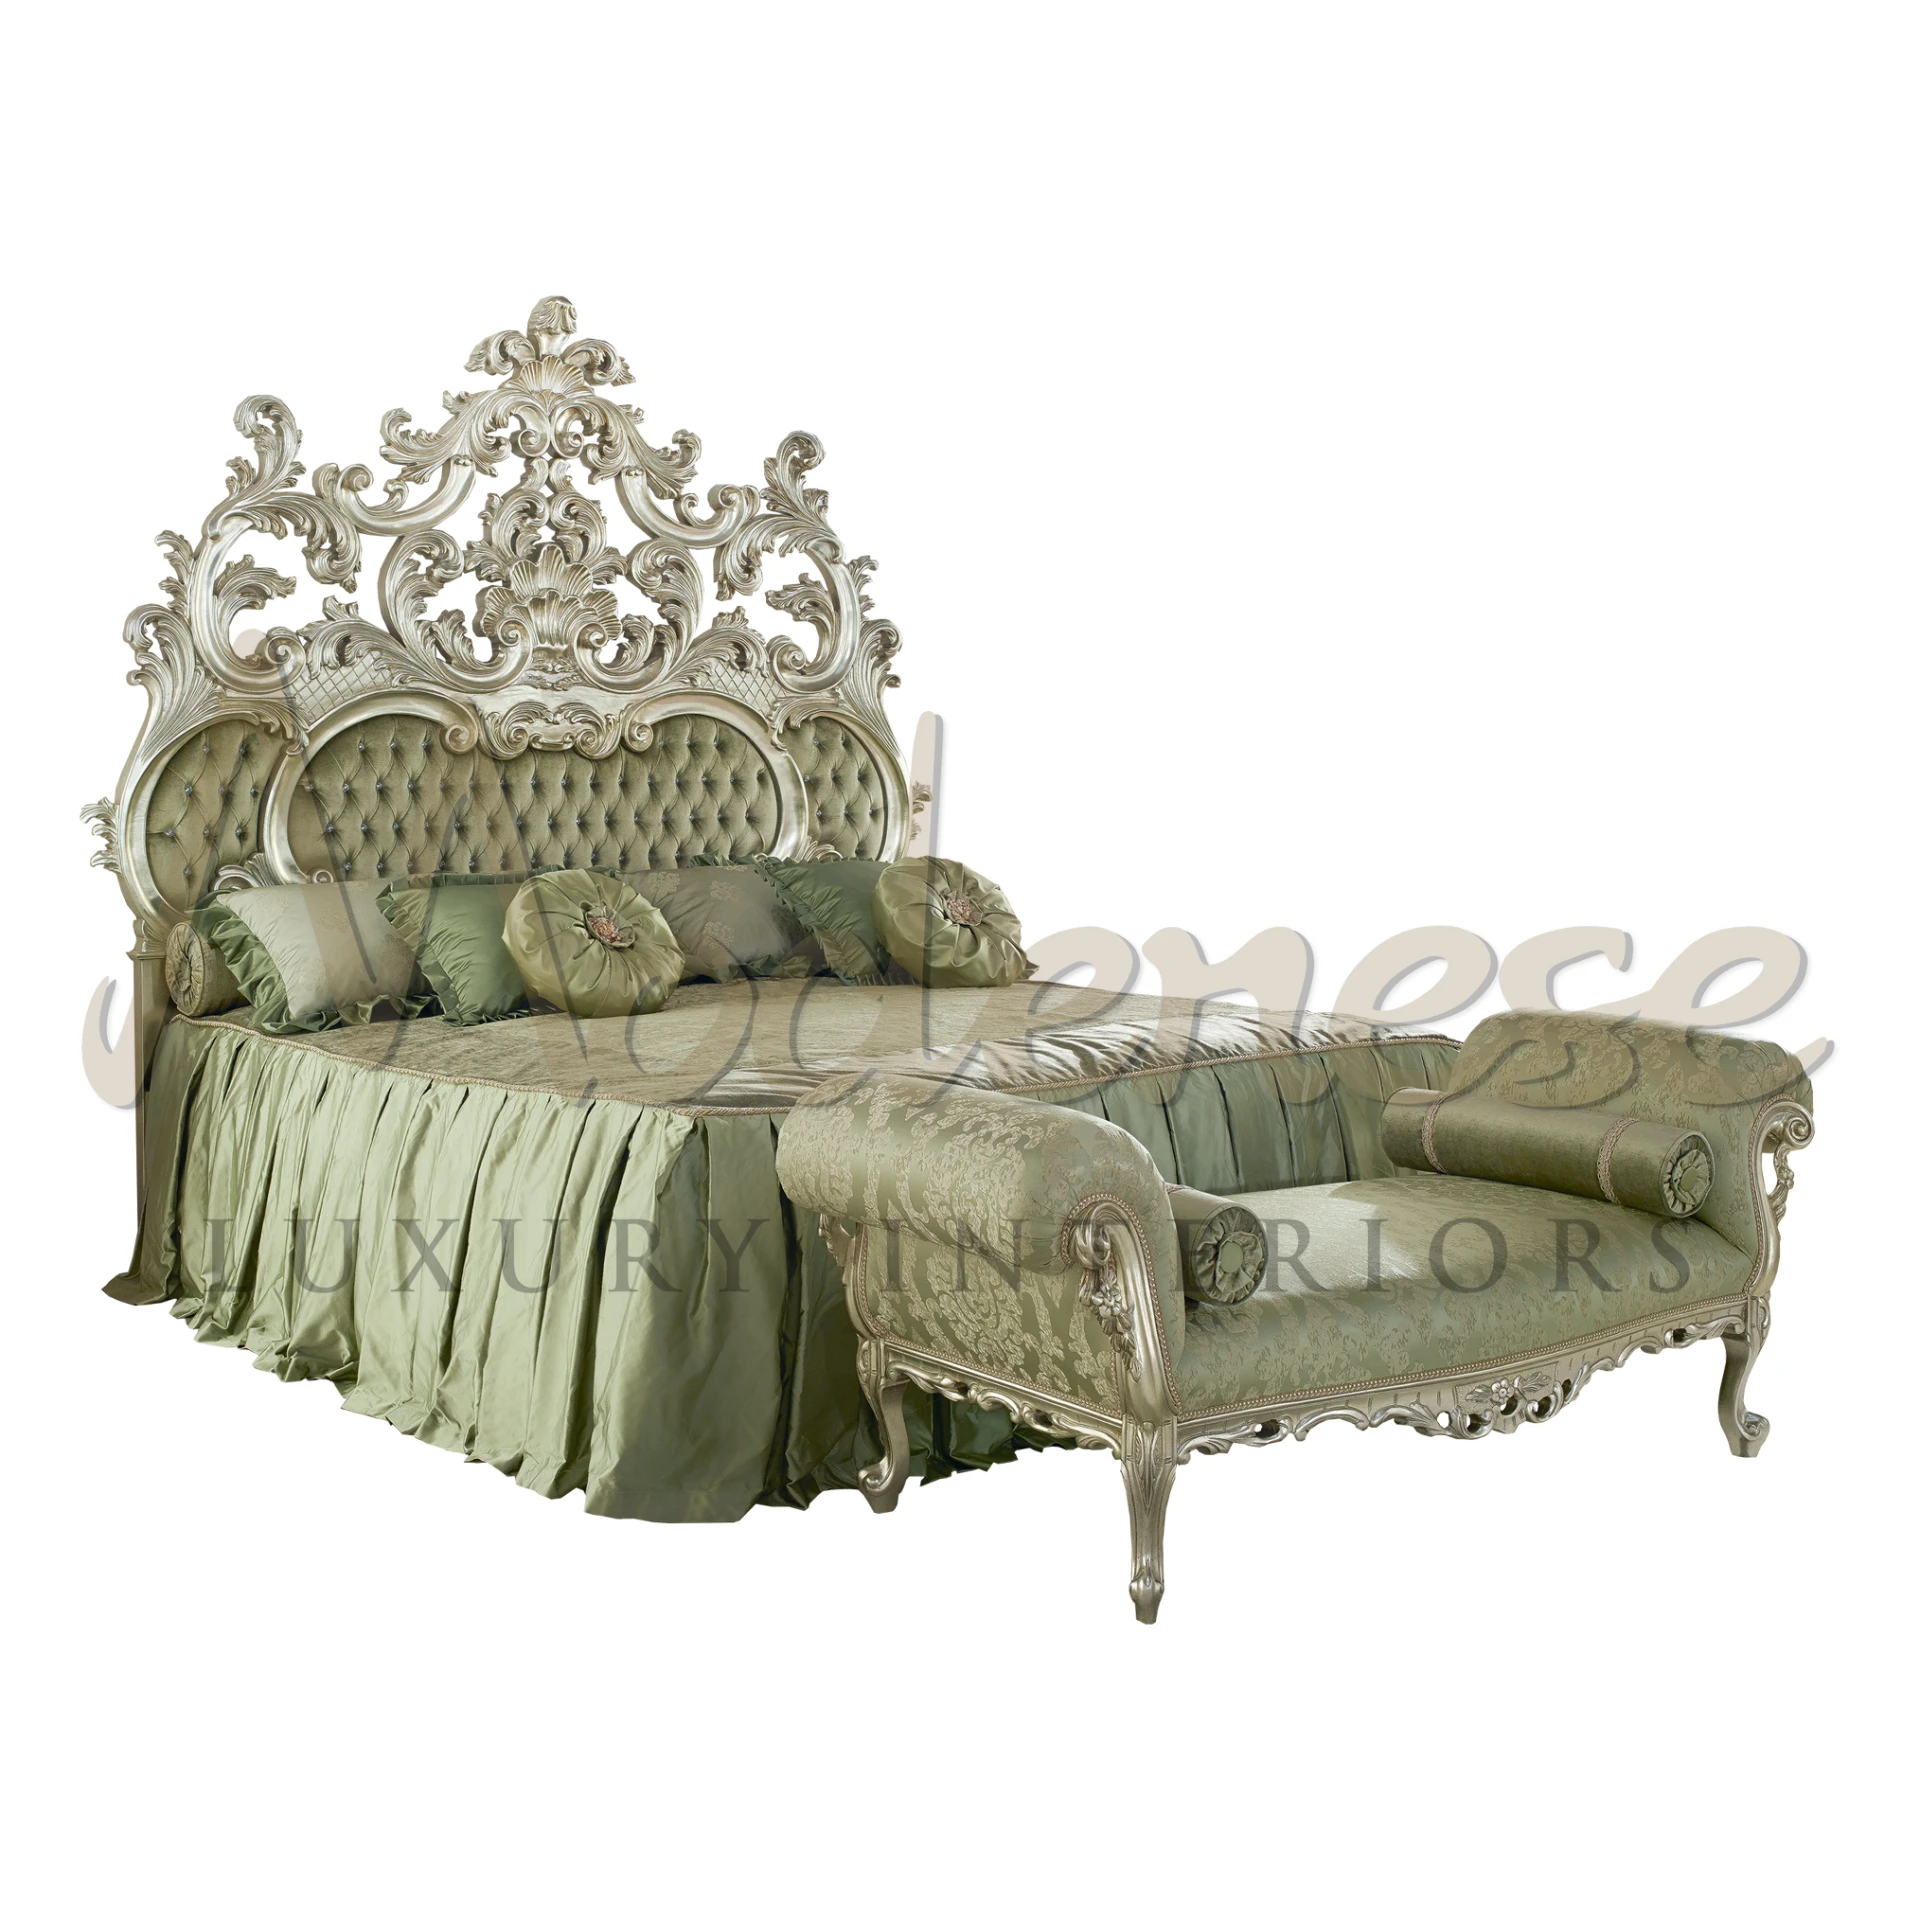 A luxurious baroque-style bed with a high, ornately carved headboard and a matching footboard. The upholstery is a plush, tufted olive green fabric that also covers the included pillows. 